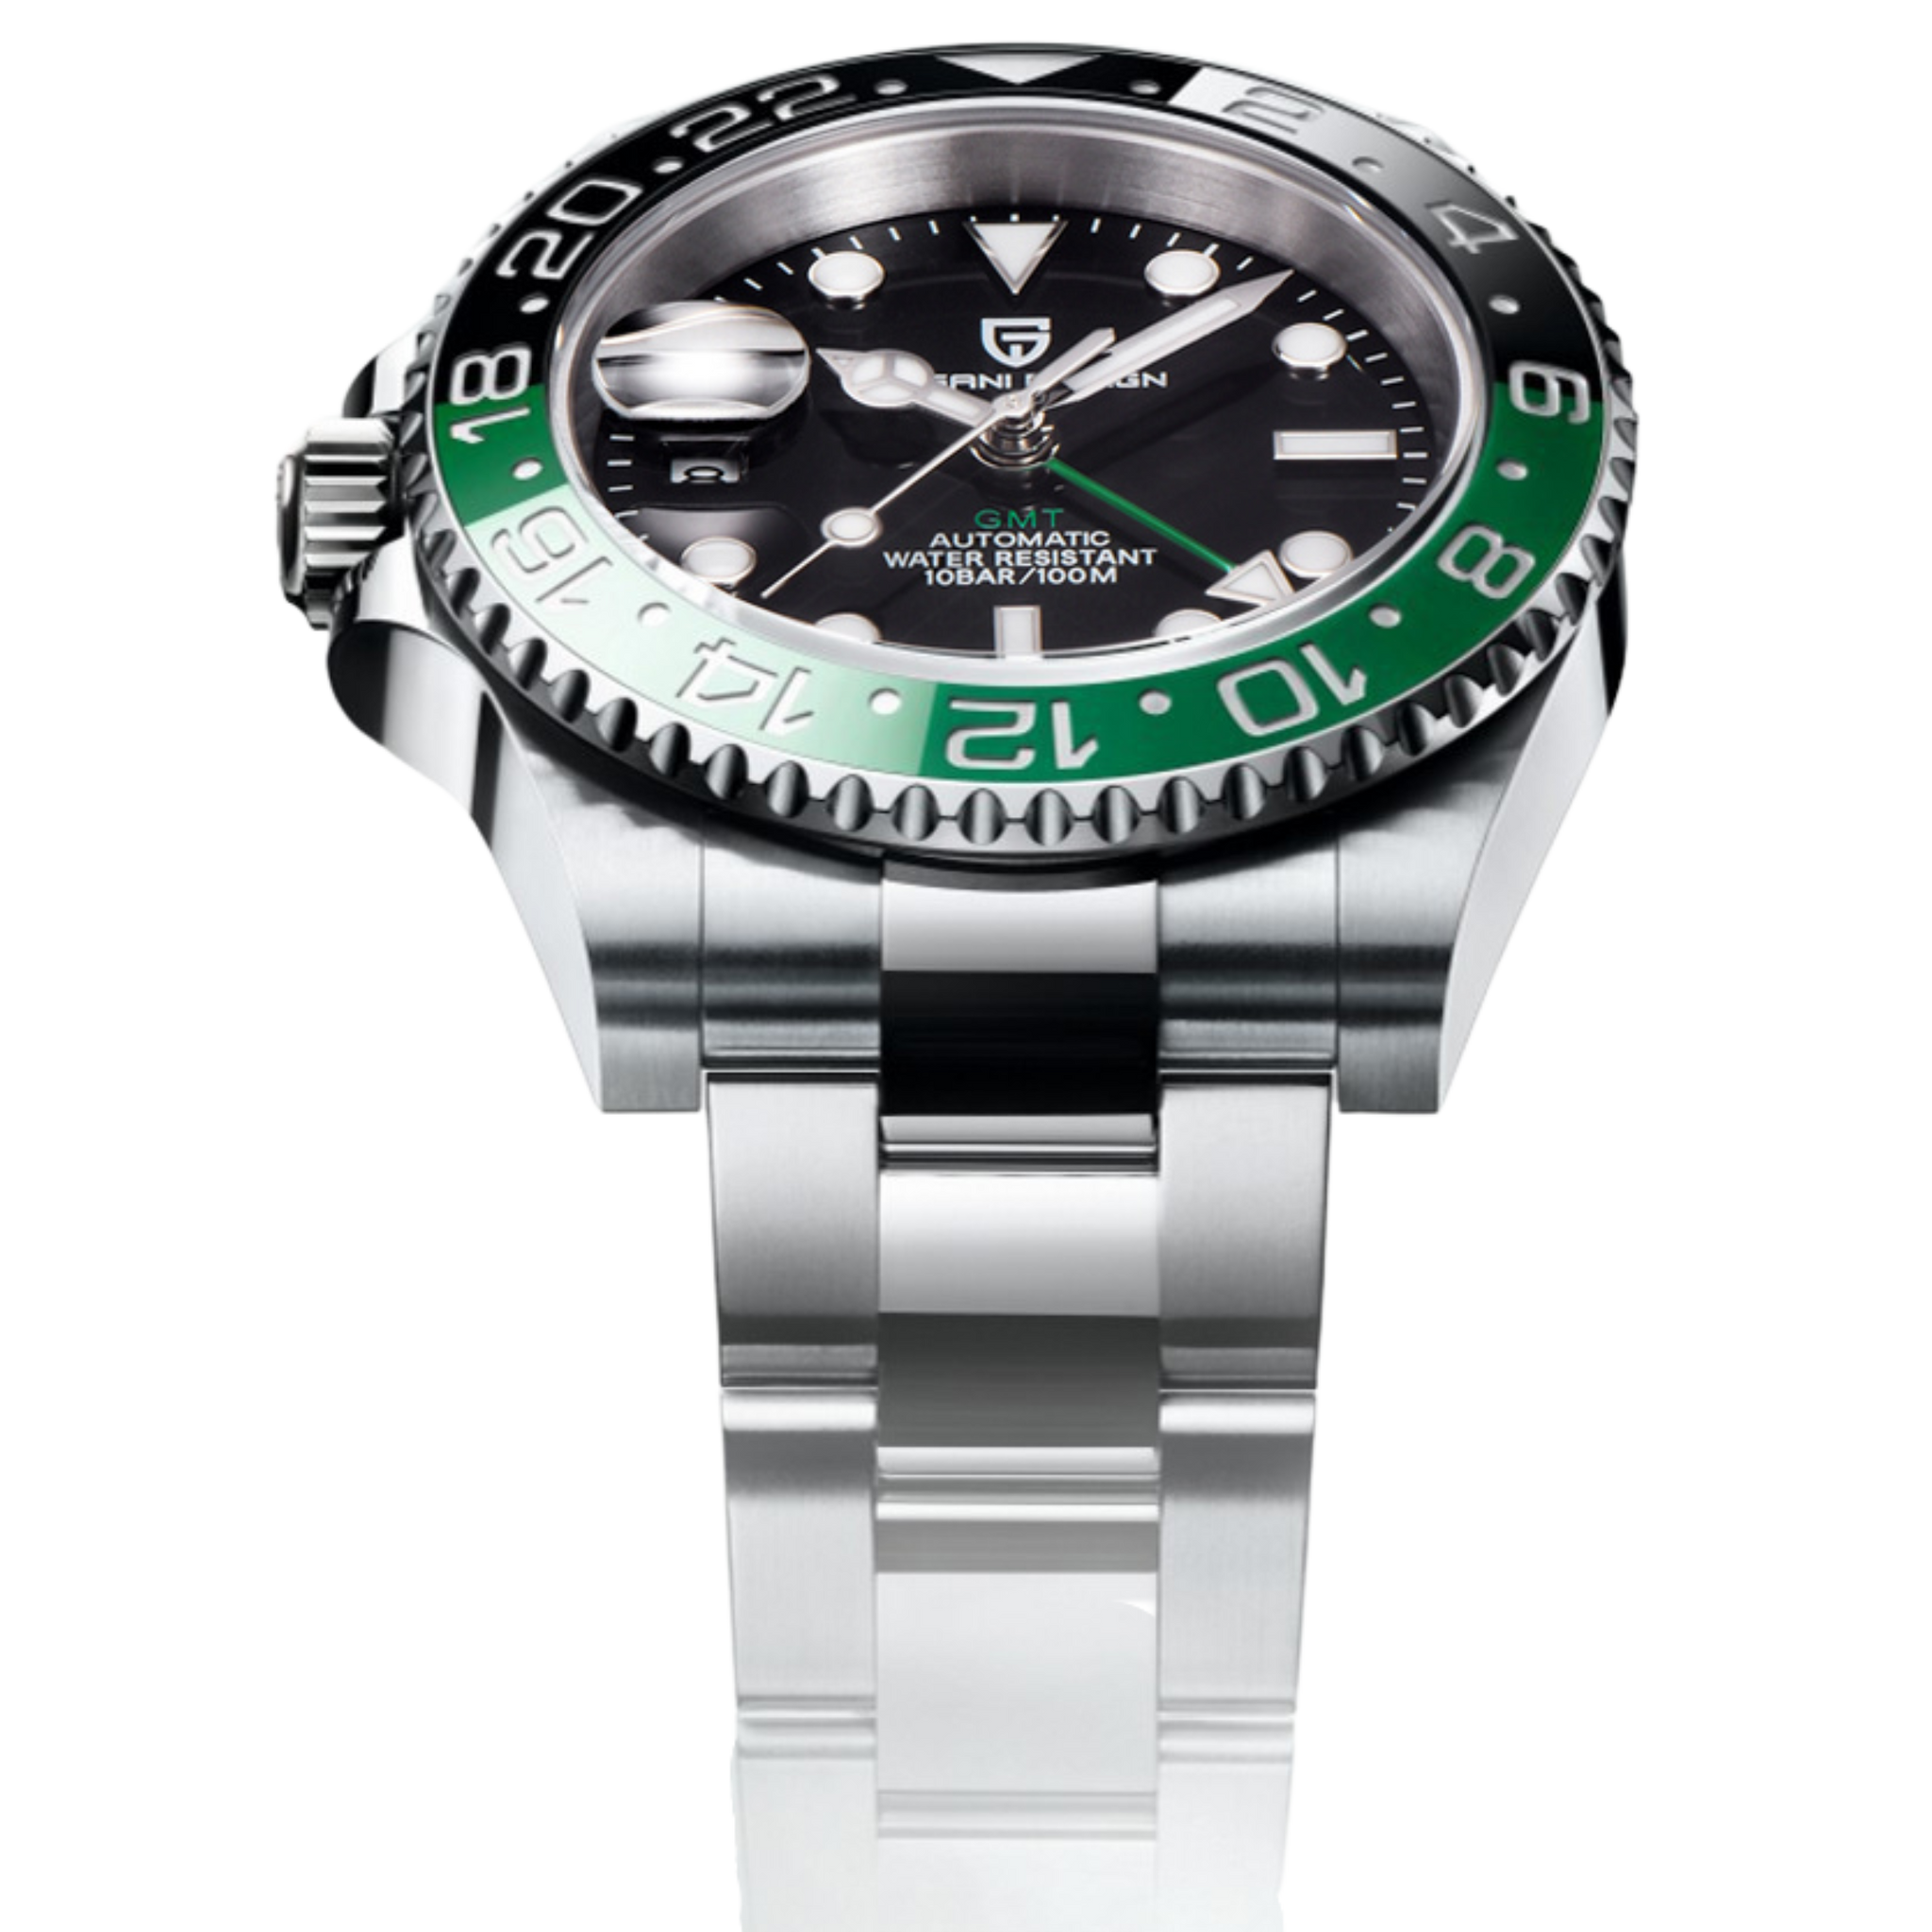 ▻ PD-1662 GMT Black Green, Stainless steel. 316L, Dual Time Zone